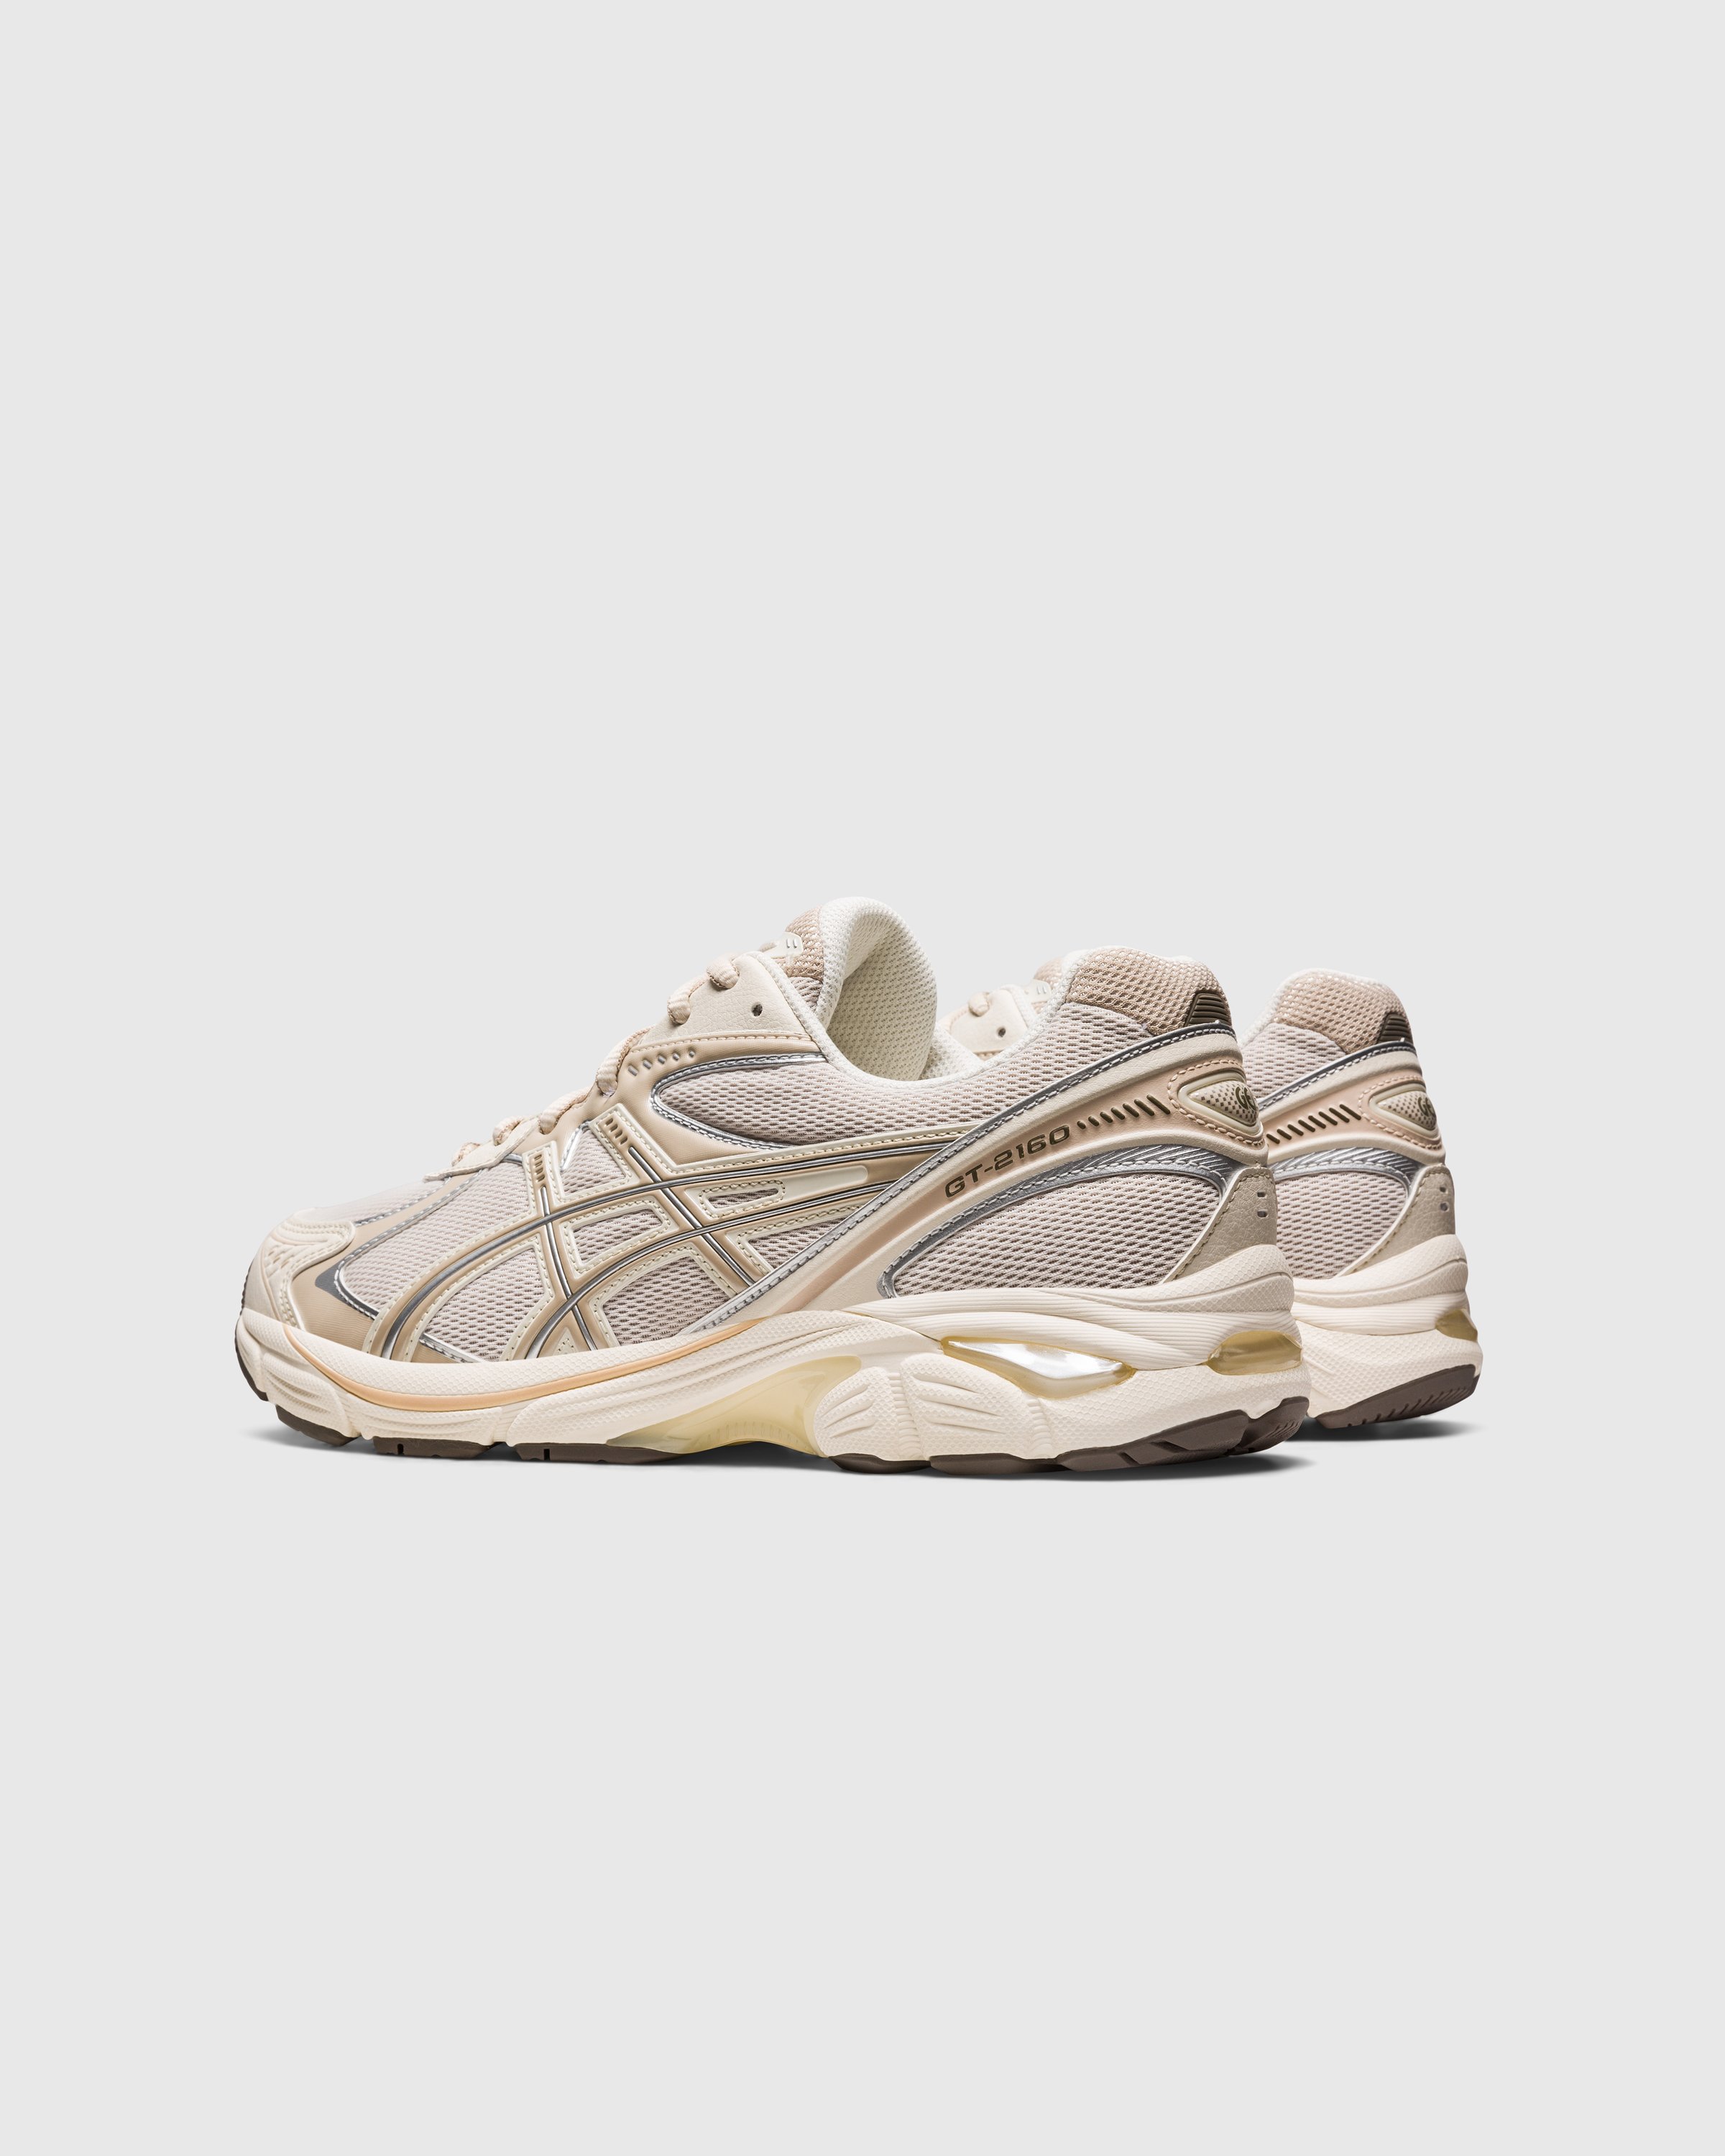 asics - GT-2160 Oatmeal/Simply Taupe - Footwear - Multi - Image 4